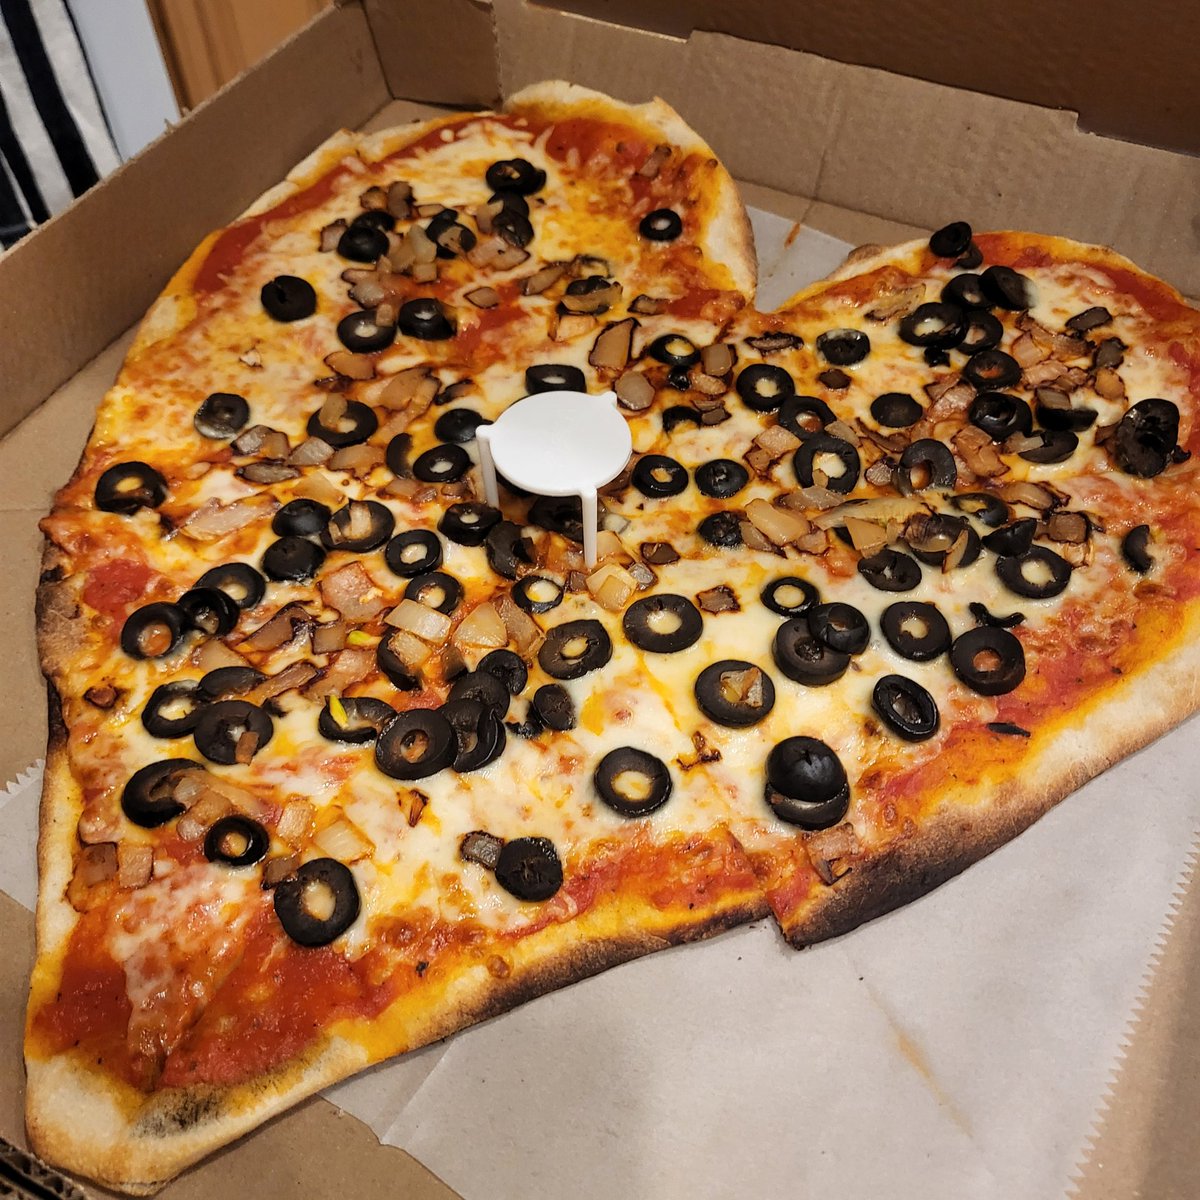 Heart shaped pizza for those #coldpizza fans... #coldpizzasong